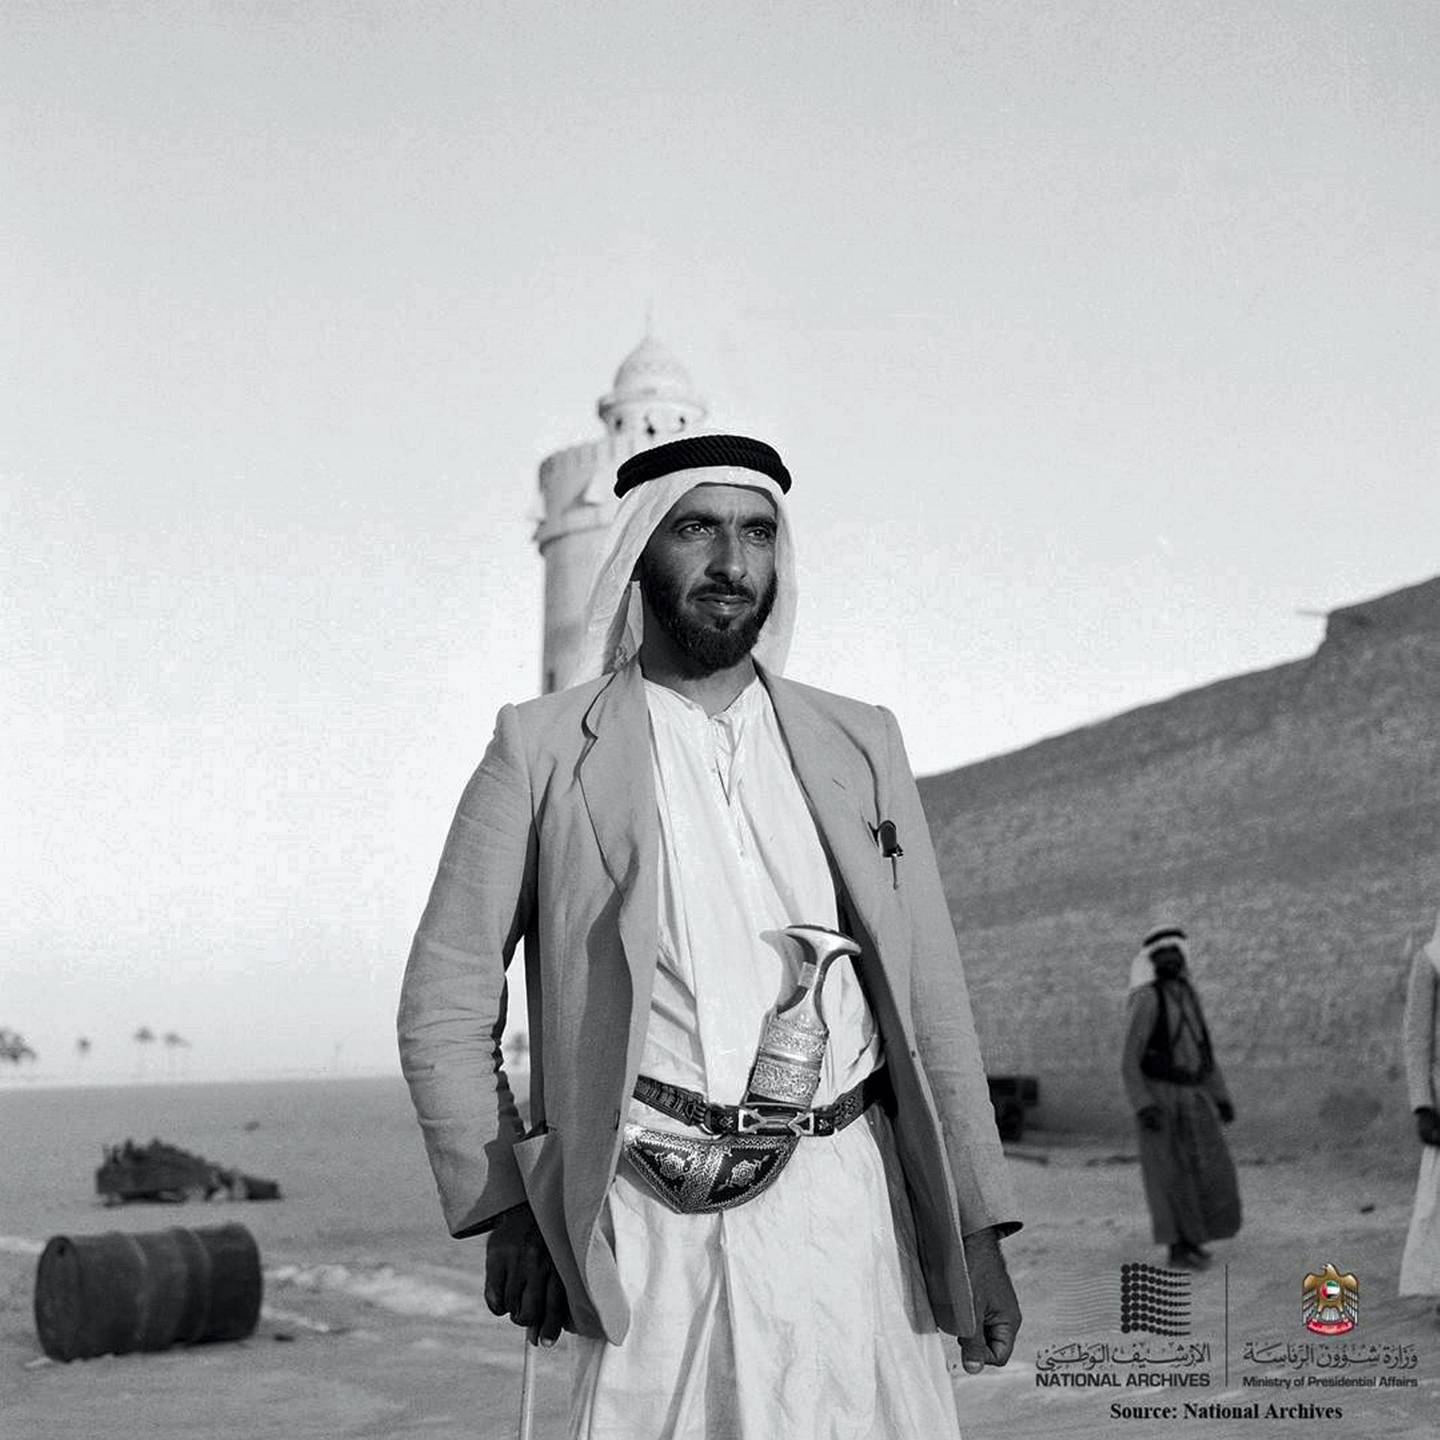 Shaikh Zayed wearing a jacket on top of his kandura as was customary in the 1950s. Photo via National Archives 